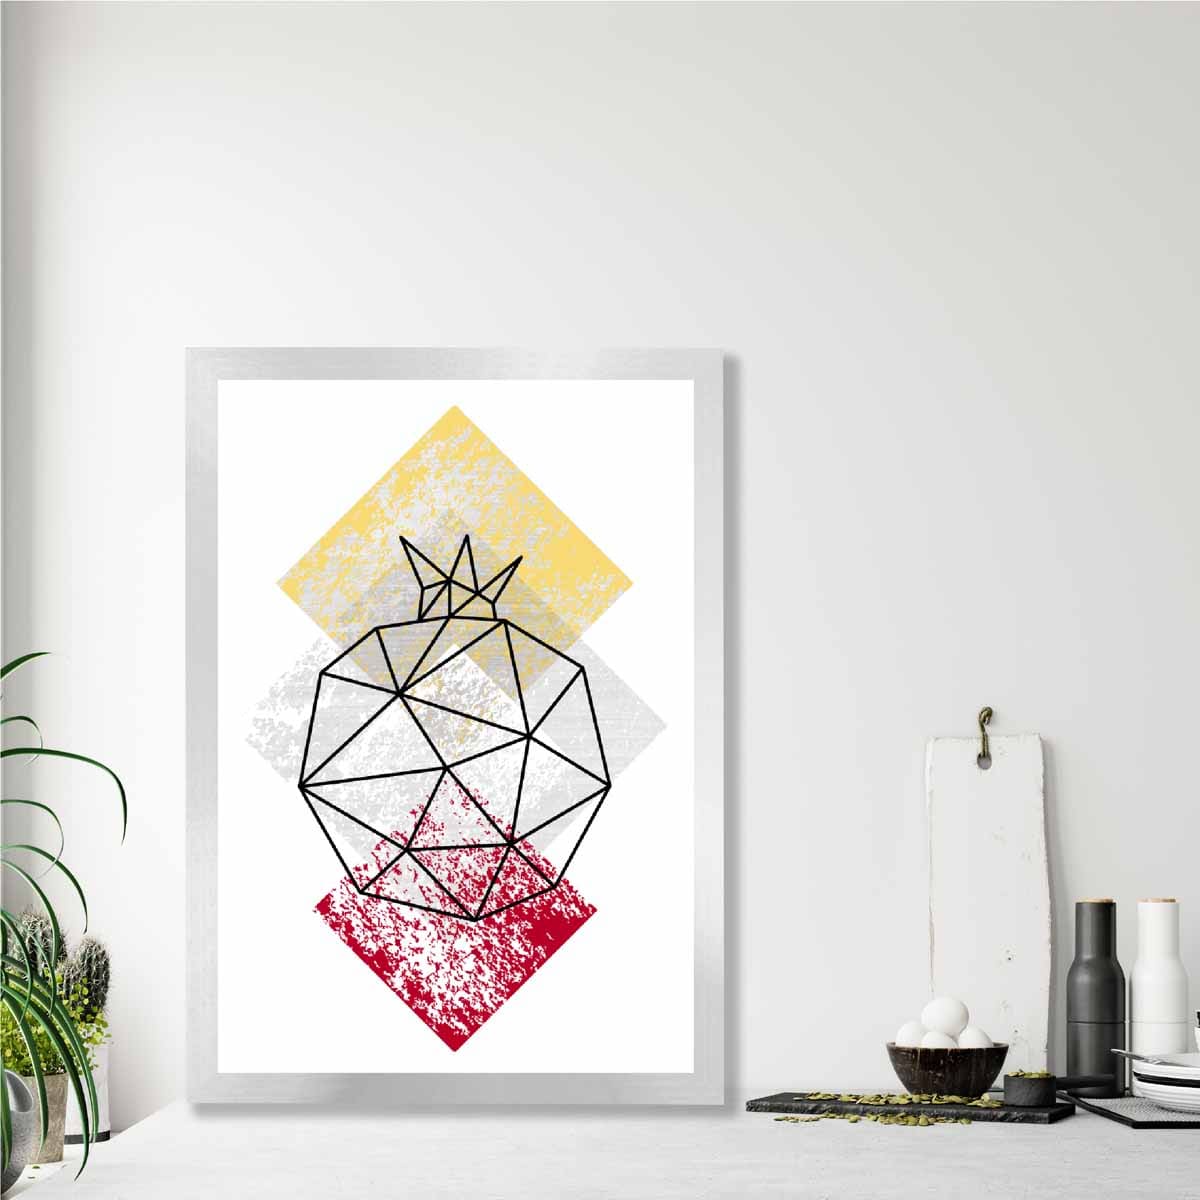 Geometric Fruit Line art Poster of Pomegranate Textured Yellow Grey Red